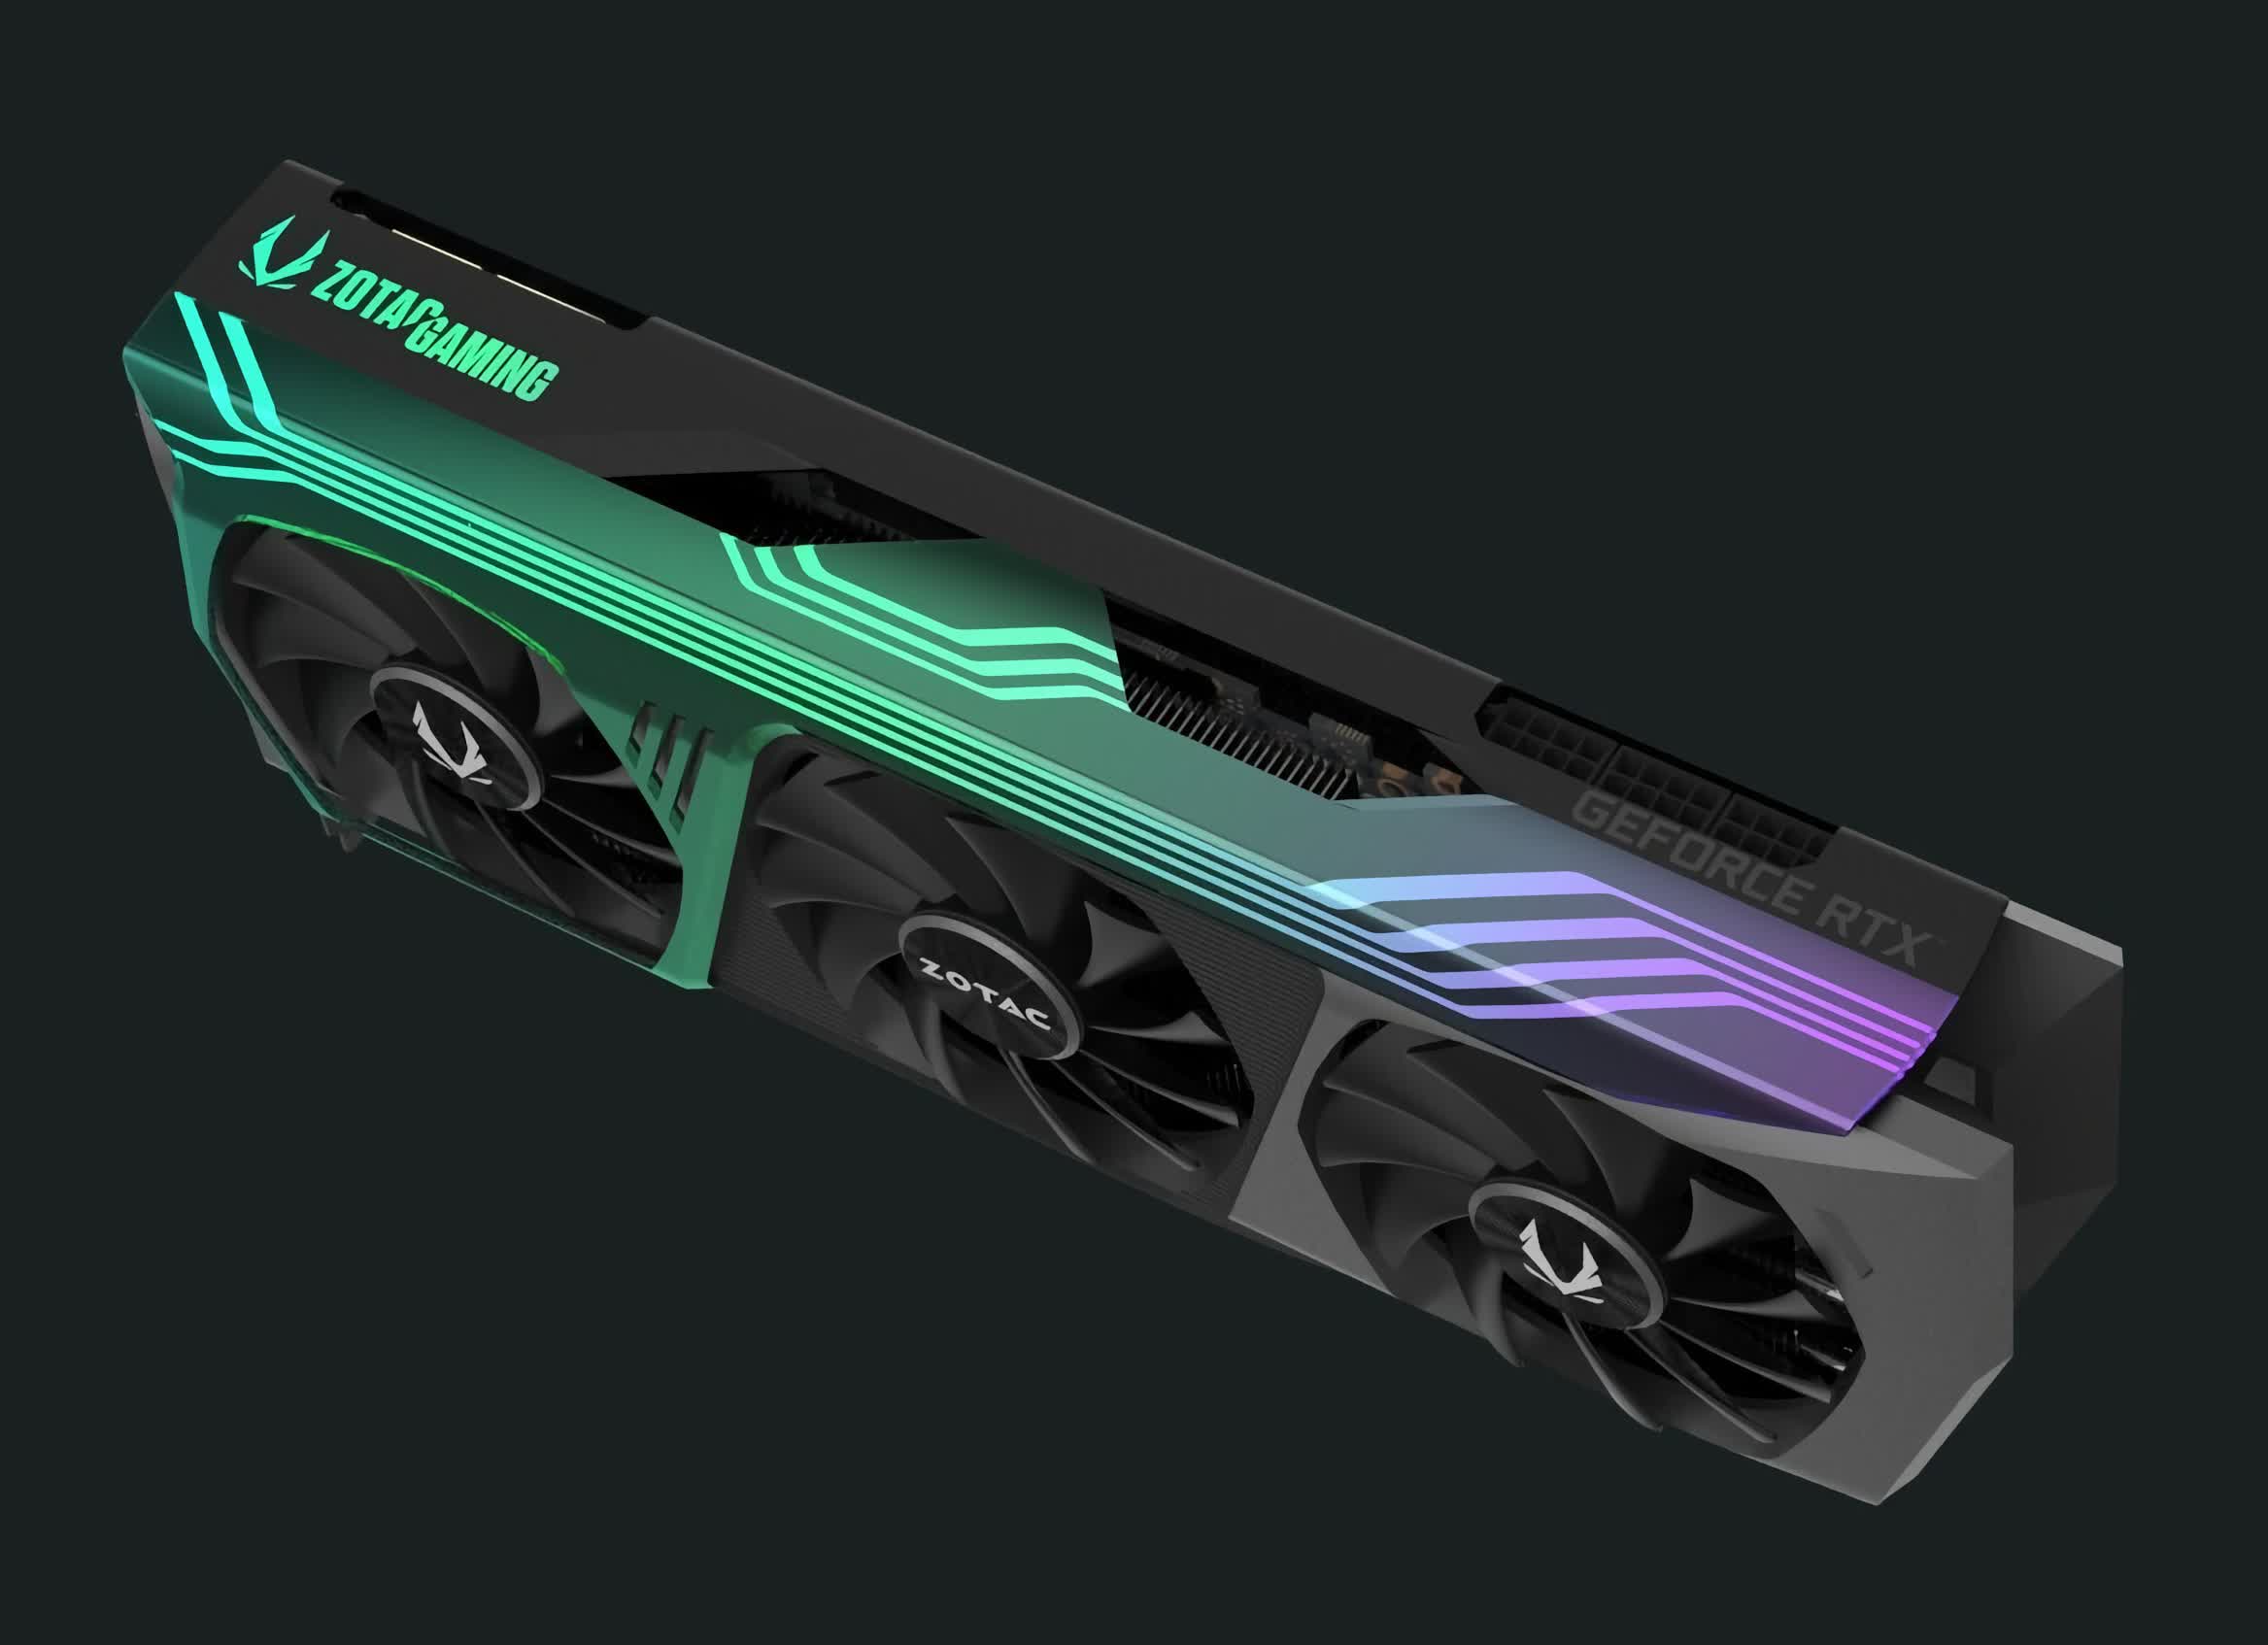 Zotac's RTX 3000 Ampere lineup looks to have leaked